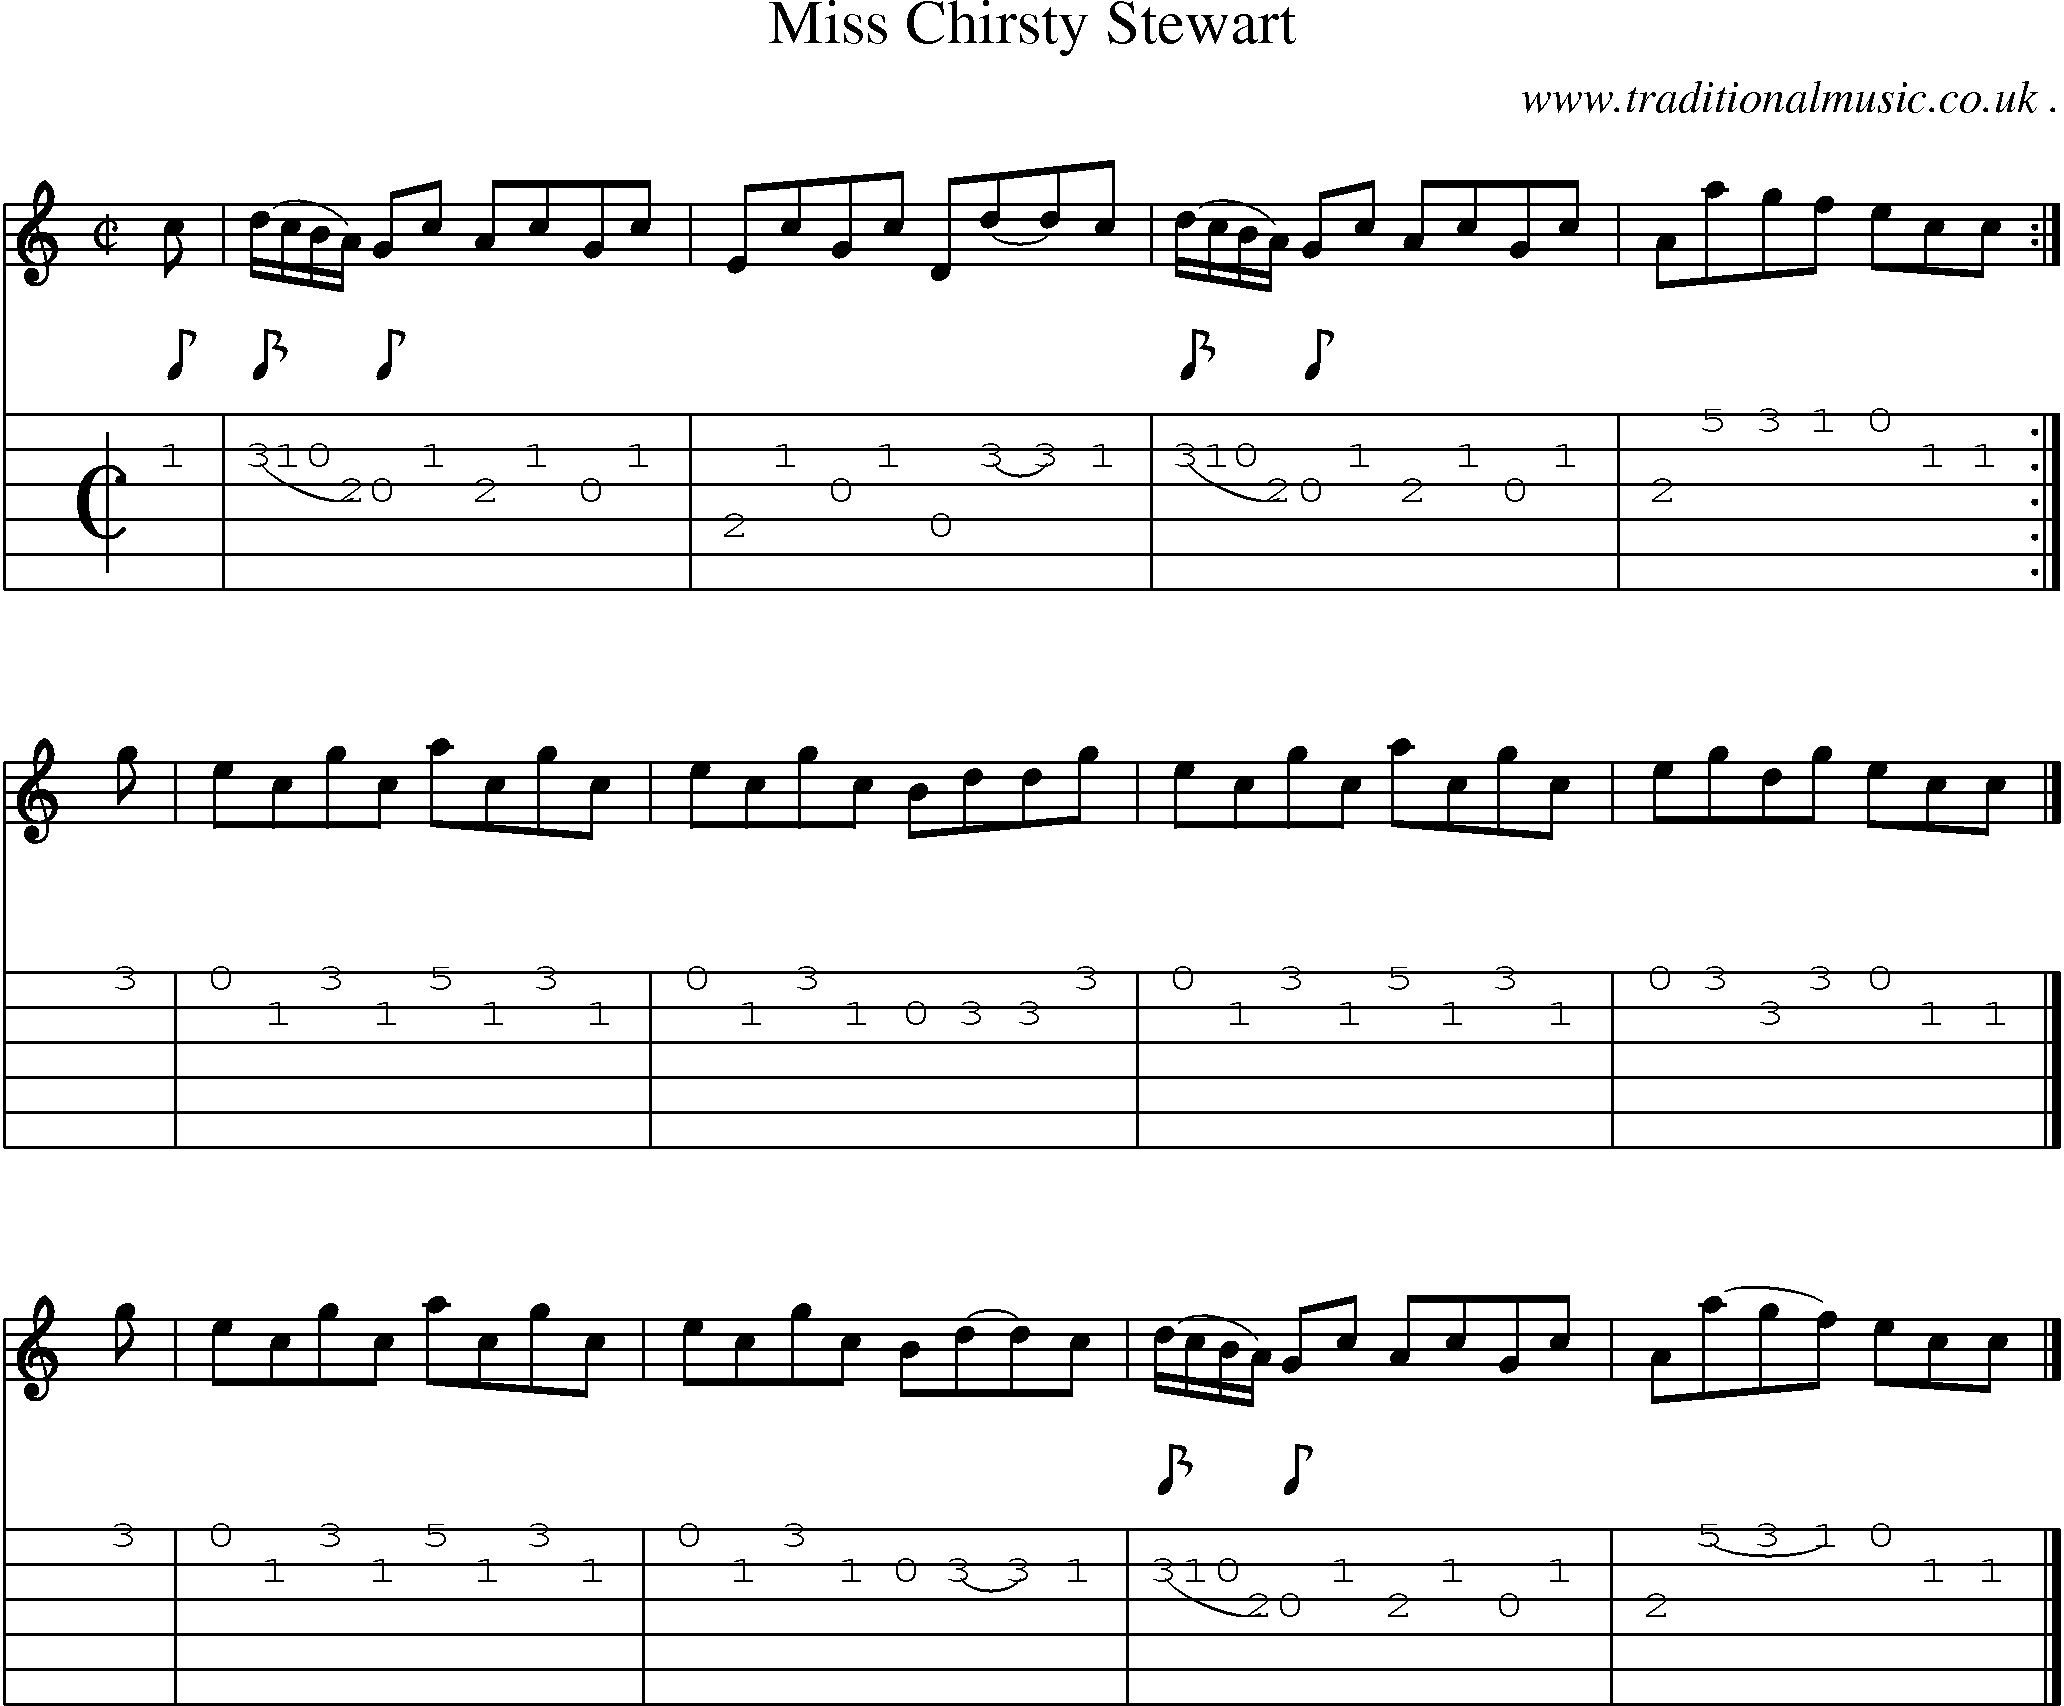 Sheet-music  score, Chords and Guitar Tabs for Miss Chirsty Stewart